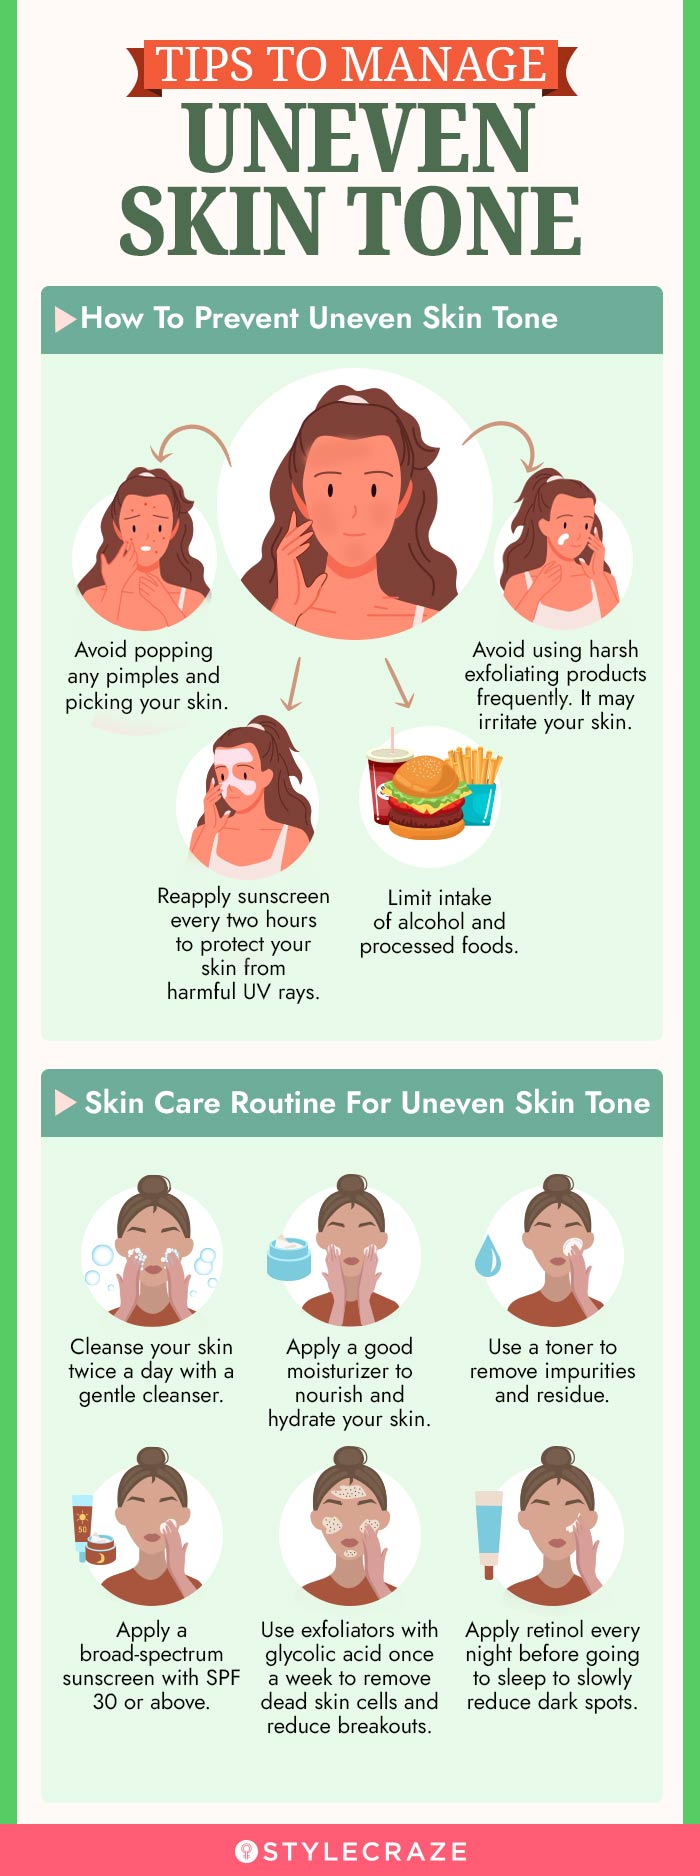 tips to manage uneven skin tone [infographic]